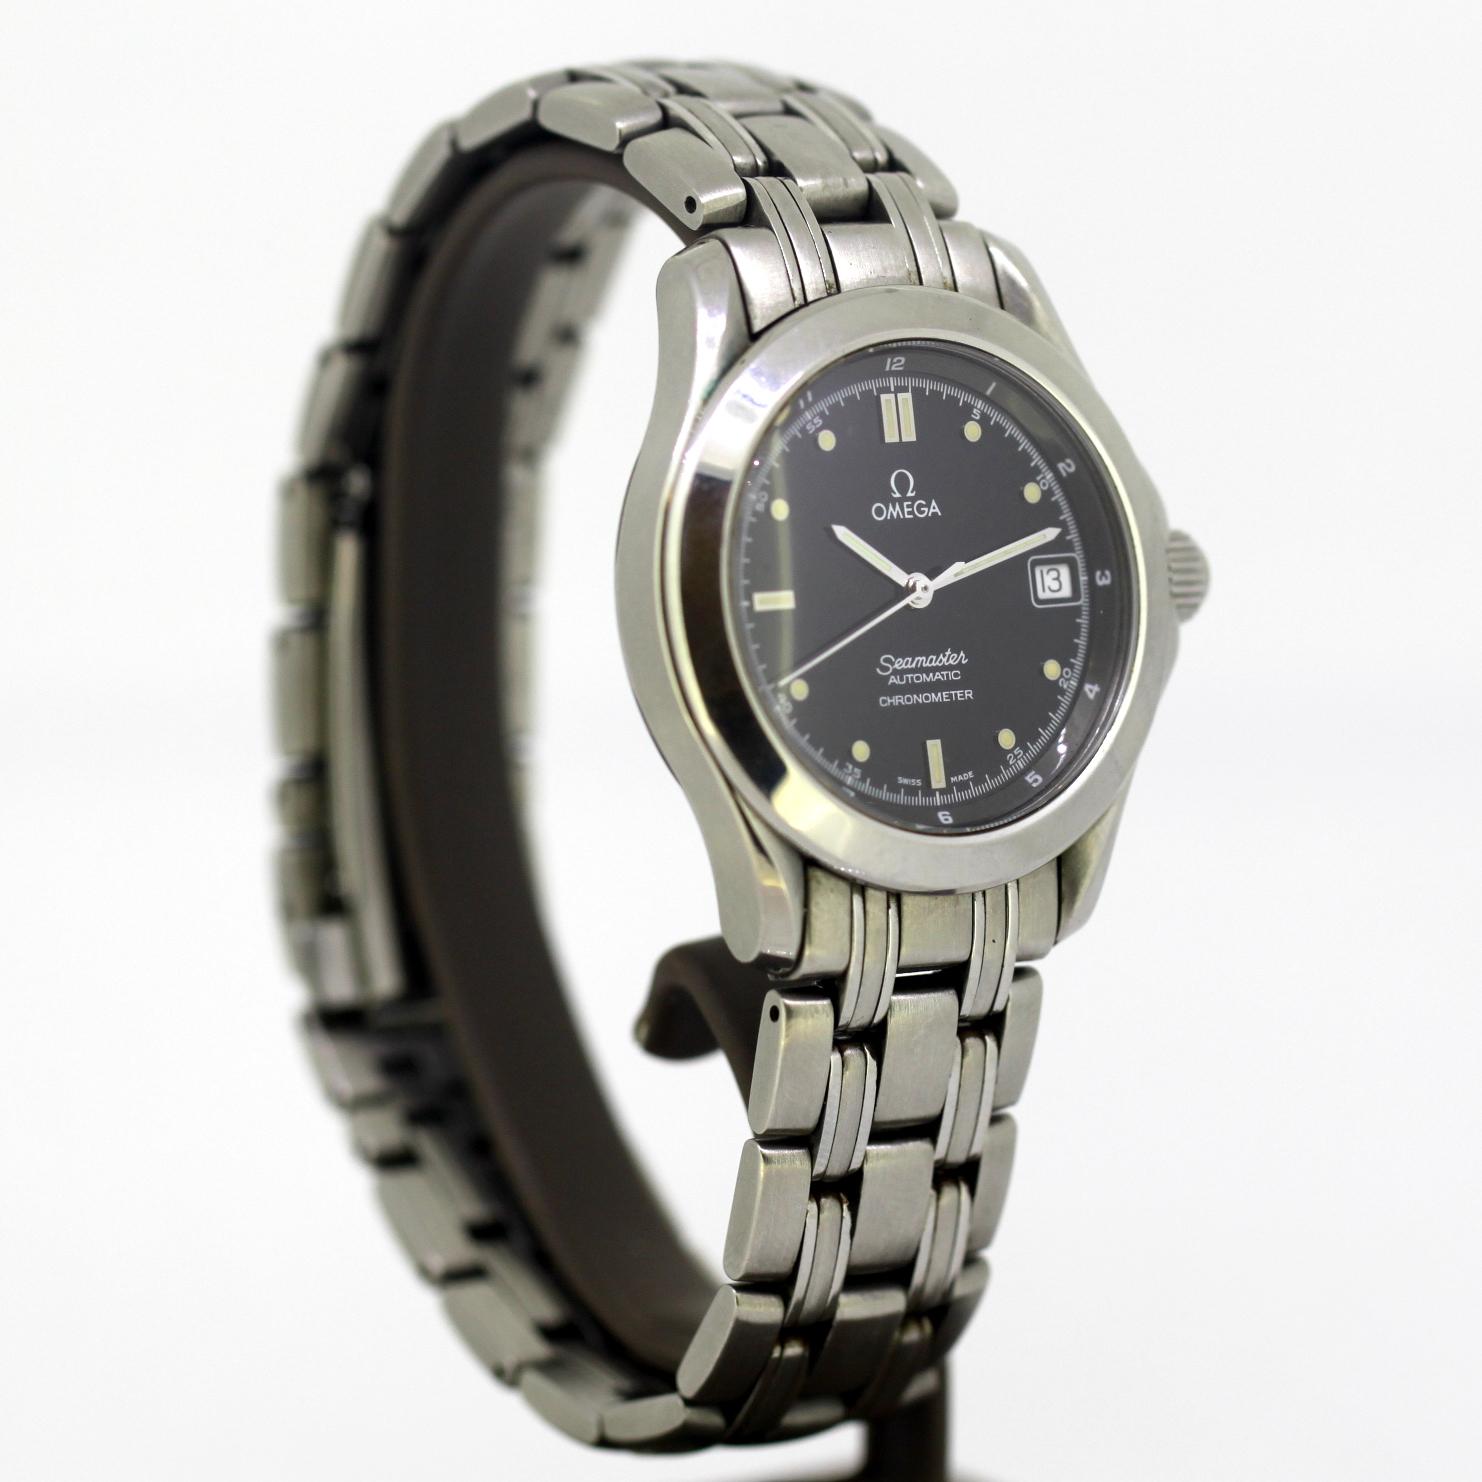 Omega Seamaster, Automatic Chronometer mens Wristwatch
Circa 1990's

Gender: Men
Case Diameter): 40 mm
Movement: Automatic
Watchband Material: Original Omega stainless steel.
Display Type:	Analogue	
Age:	 1980's
Dial : (See Photos)
Hands: Steel &